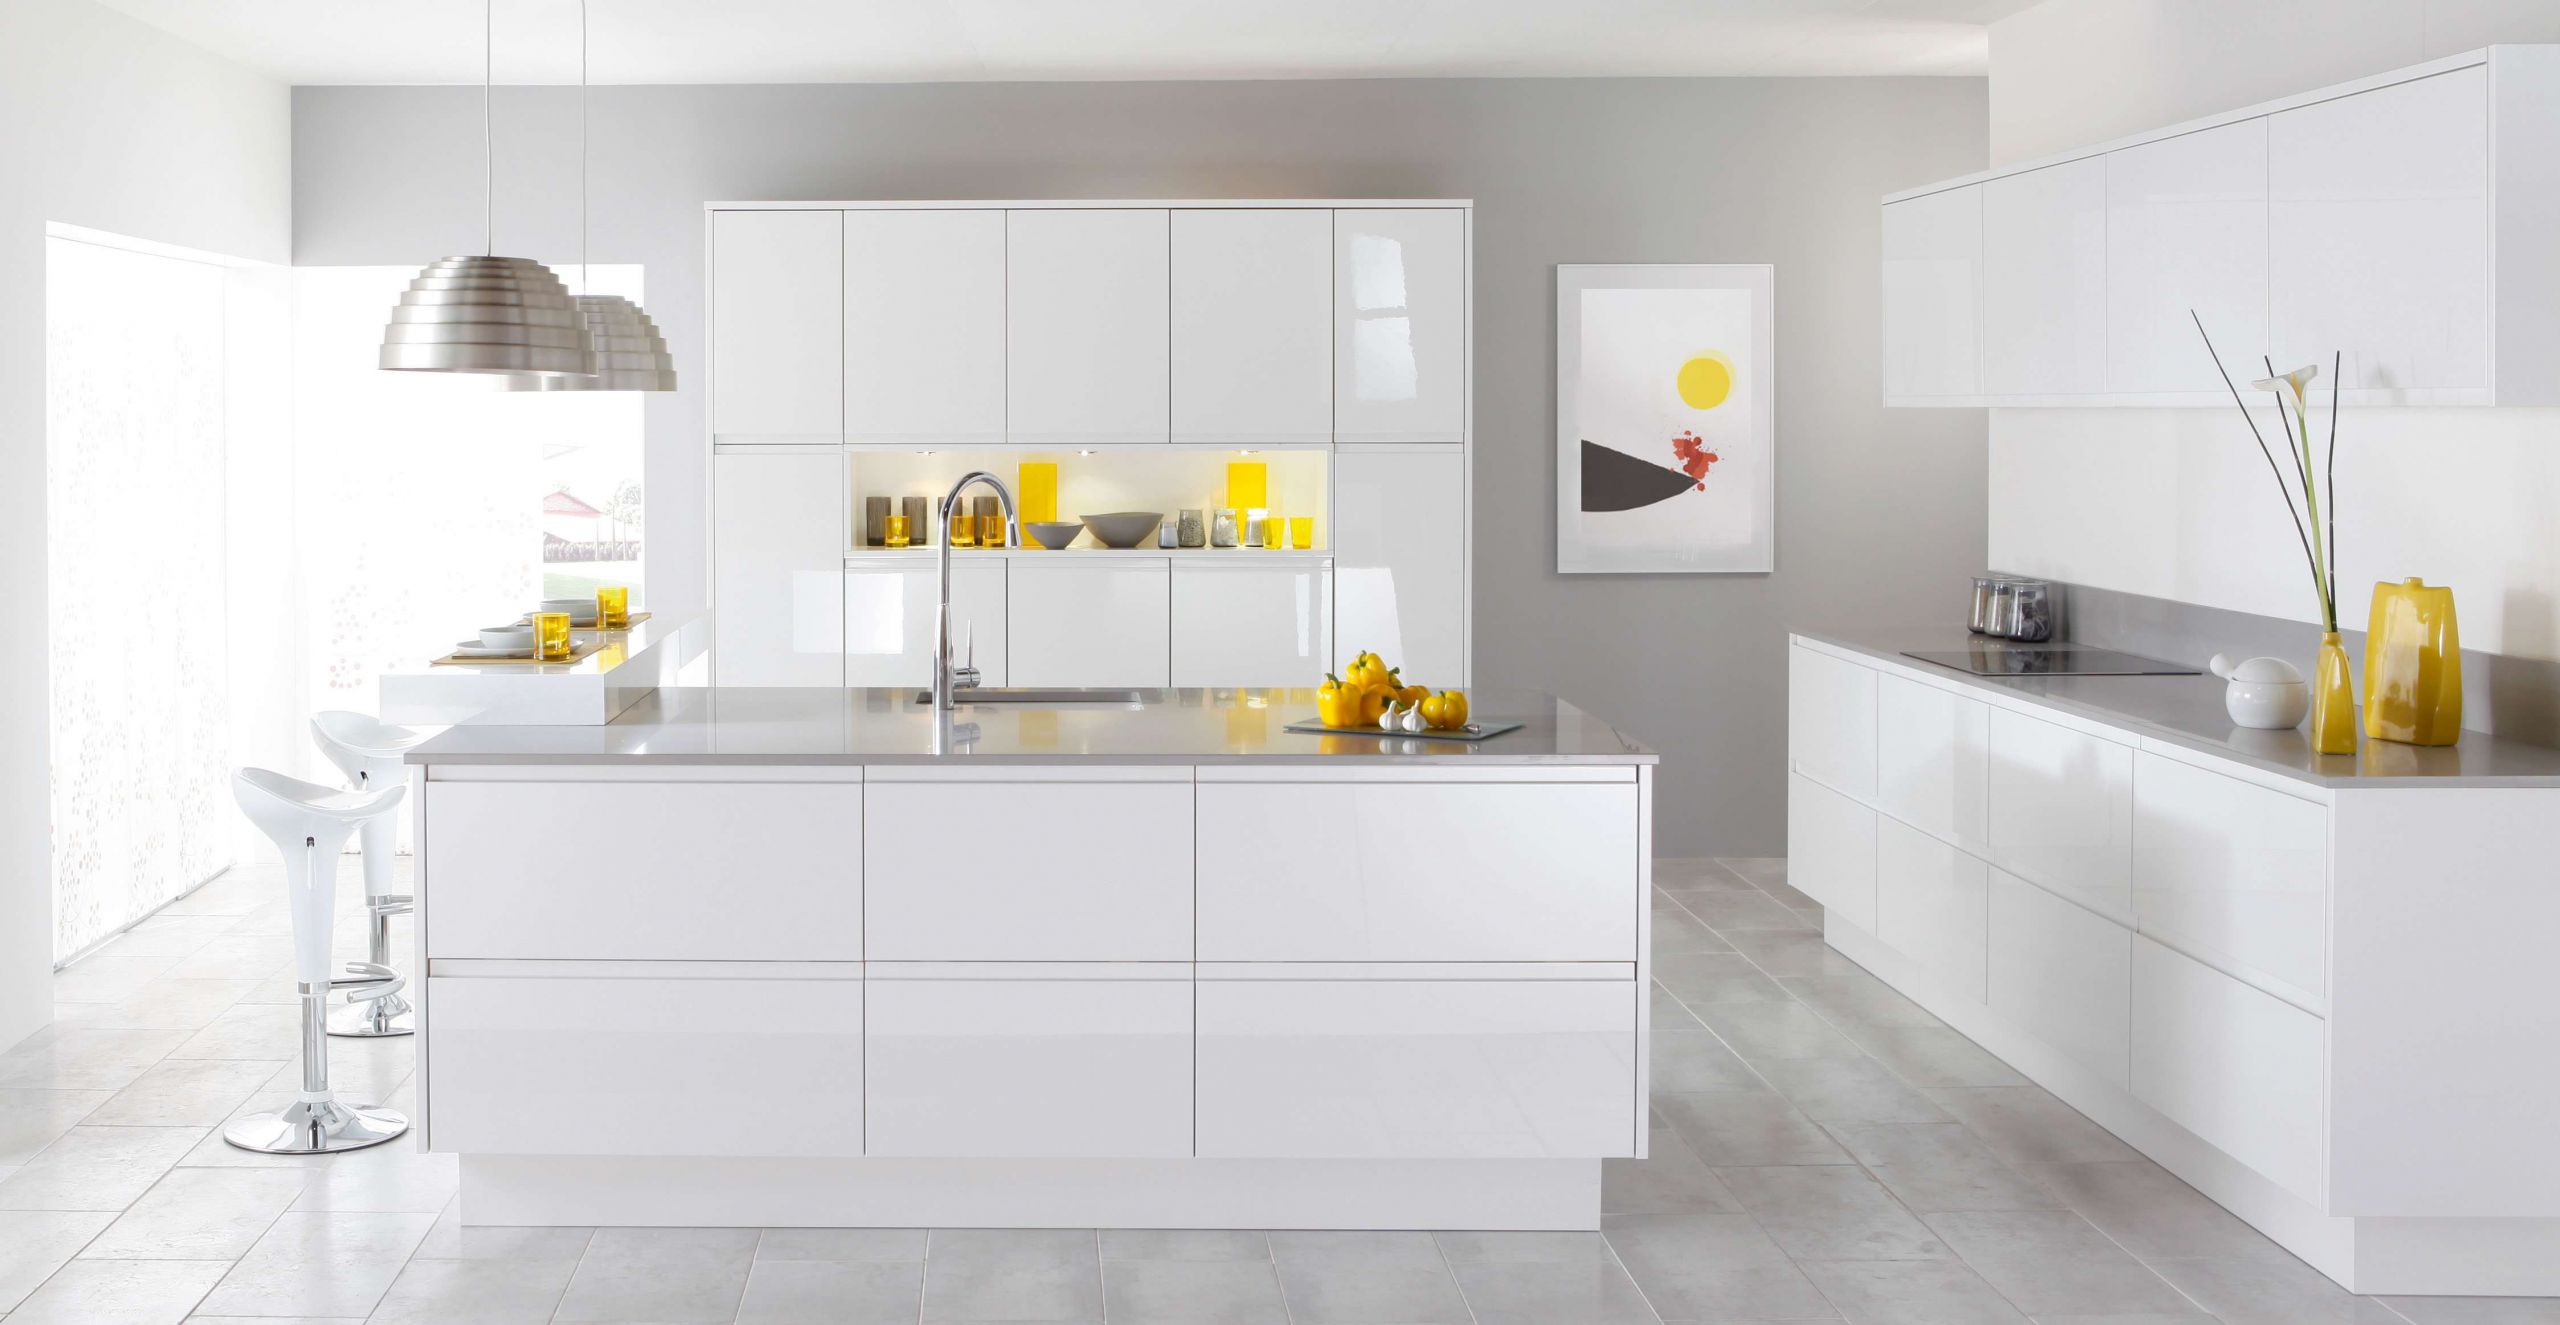 White Contemporary Kitchen Cabinets
 How to Beautify a White Kitchen Mozaico Blog